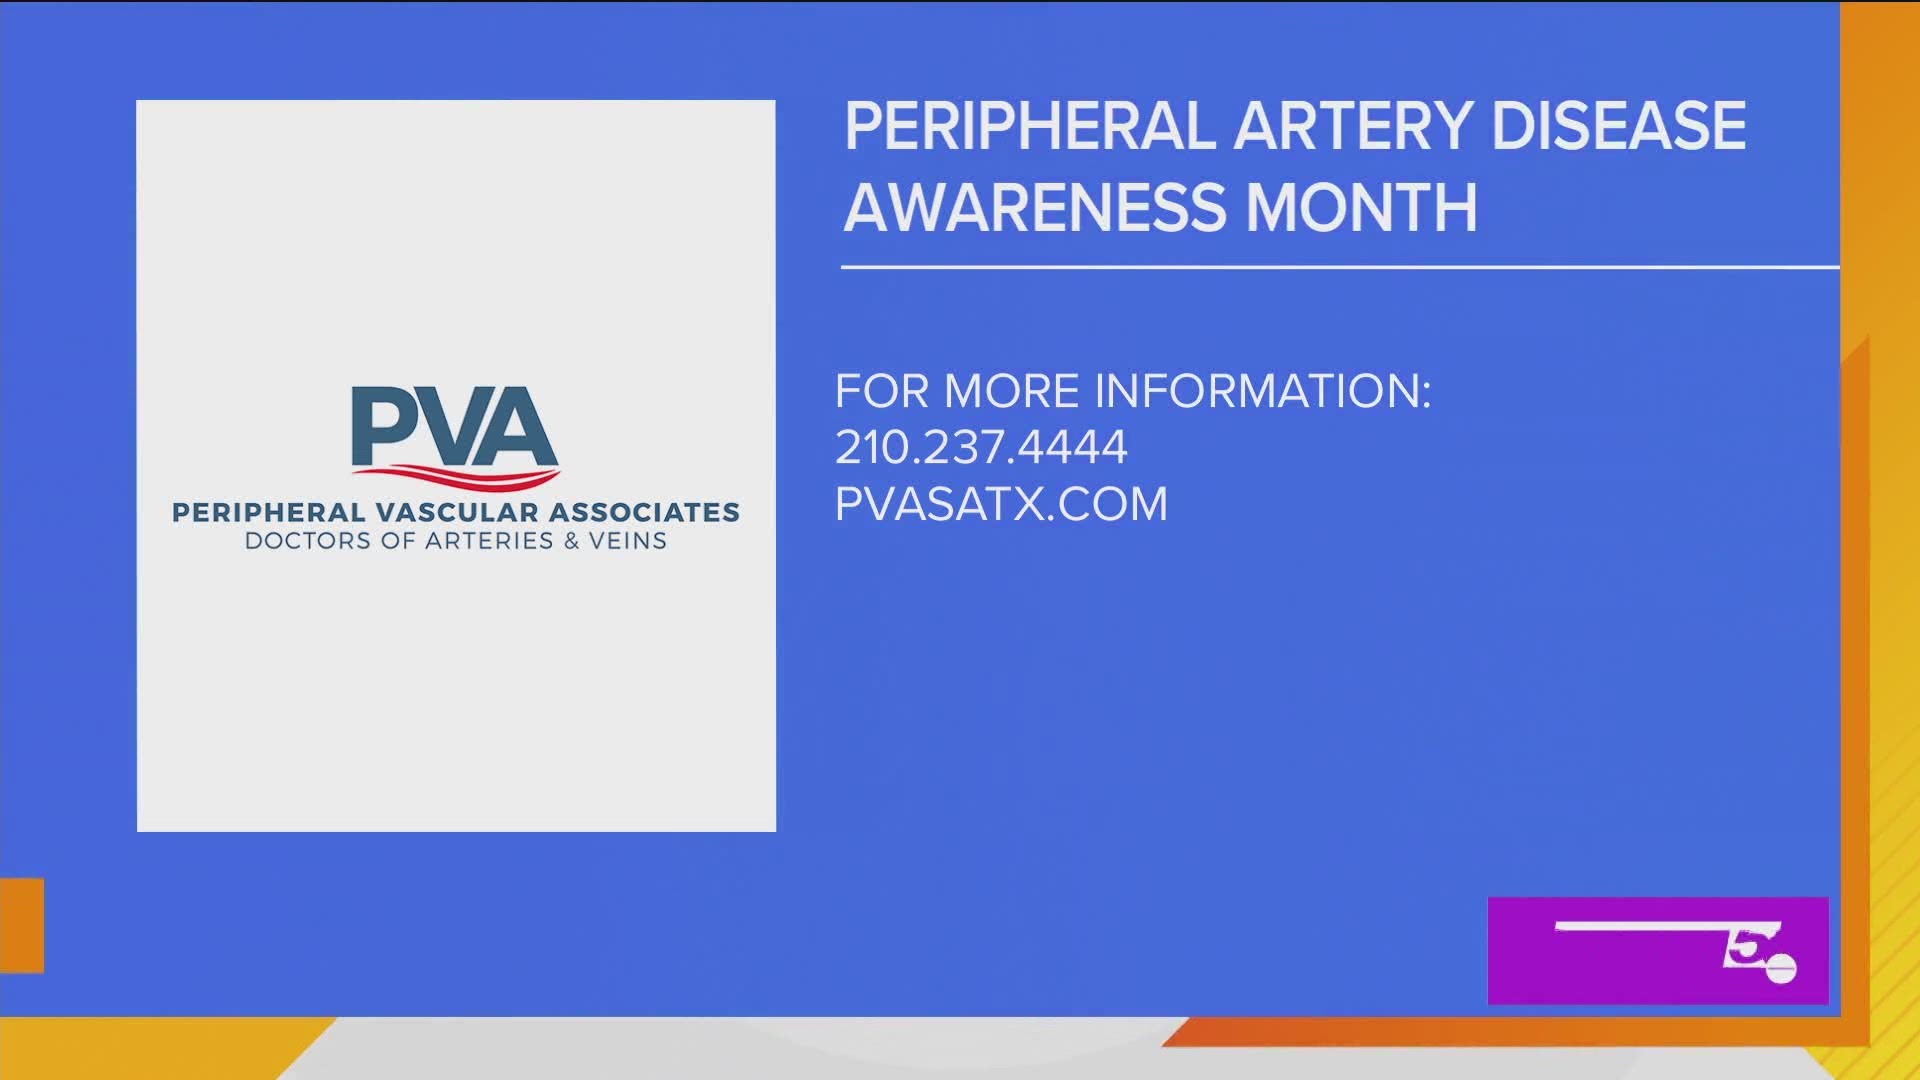 Vascular health can show you so much about your overall health. PVA wants to remind you of symptoms associated with diseased arteries and how you can prevent them.